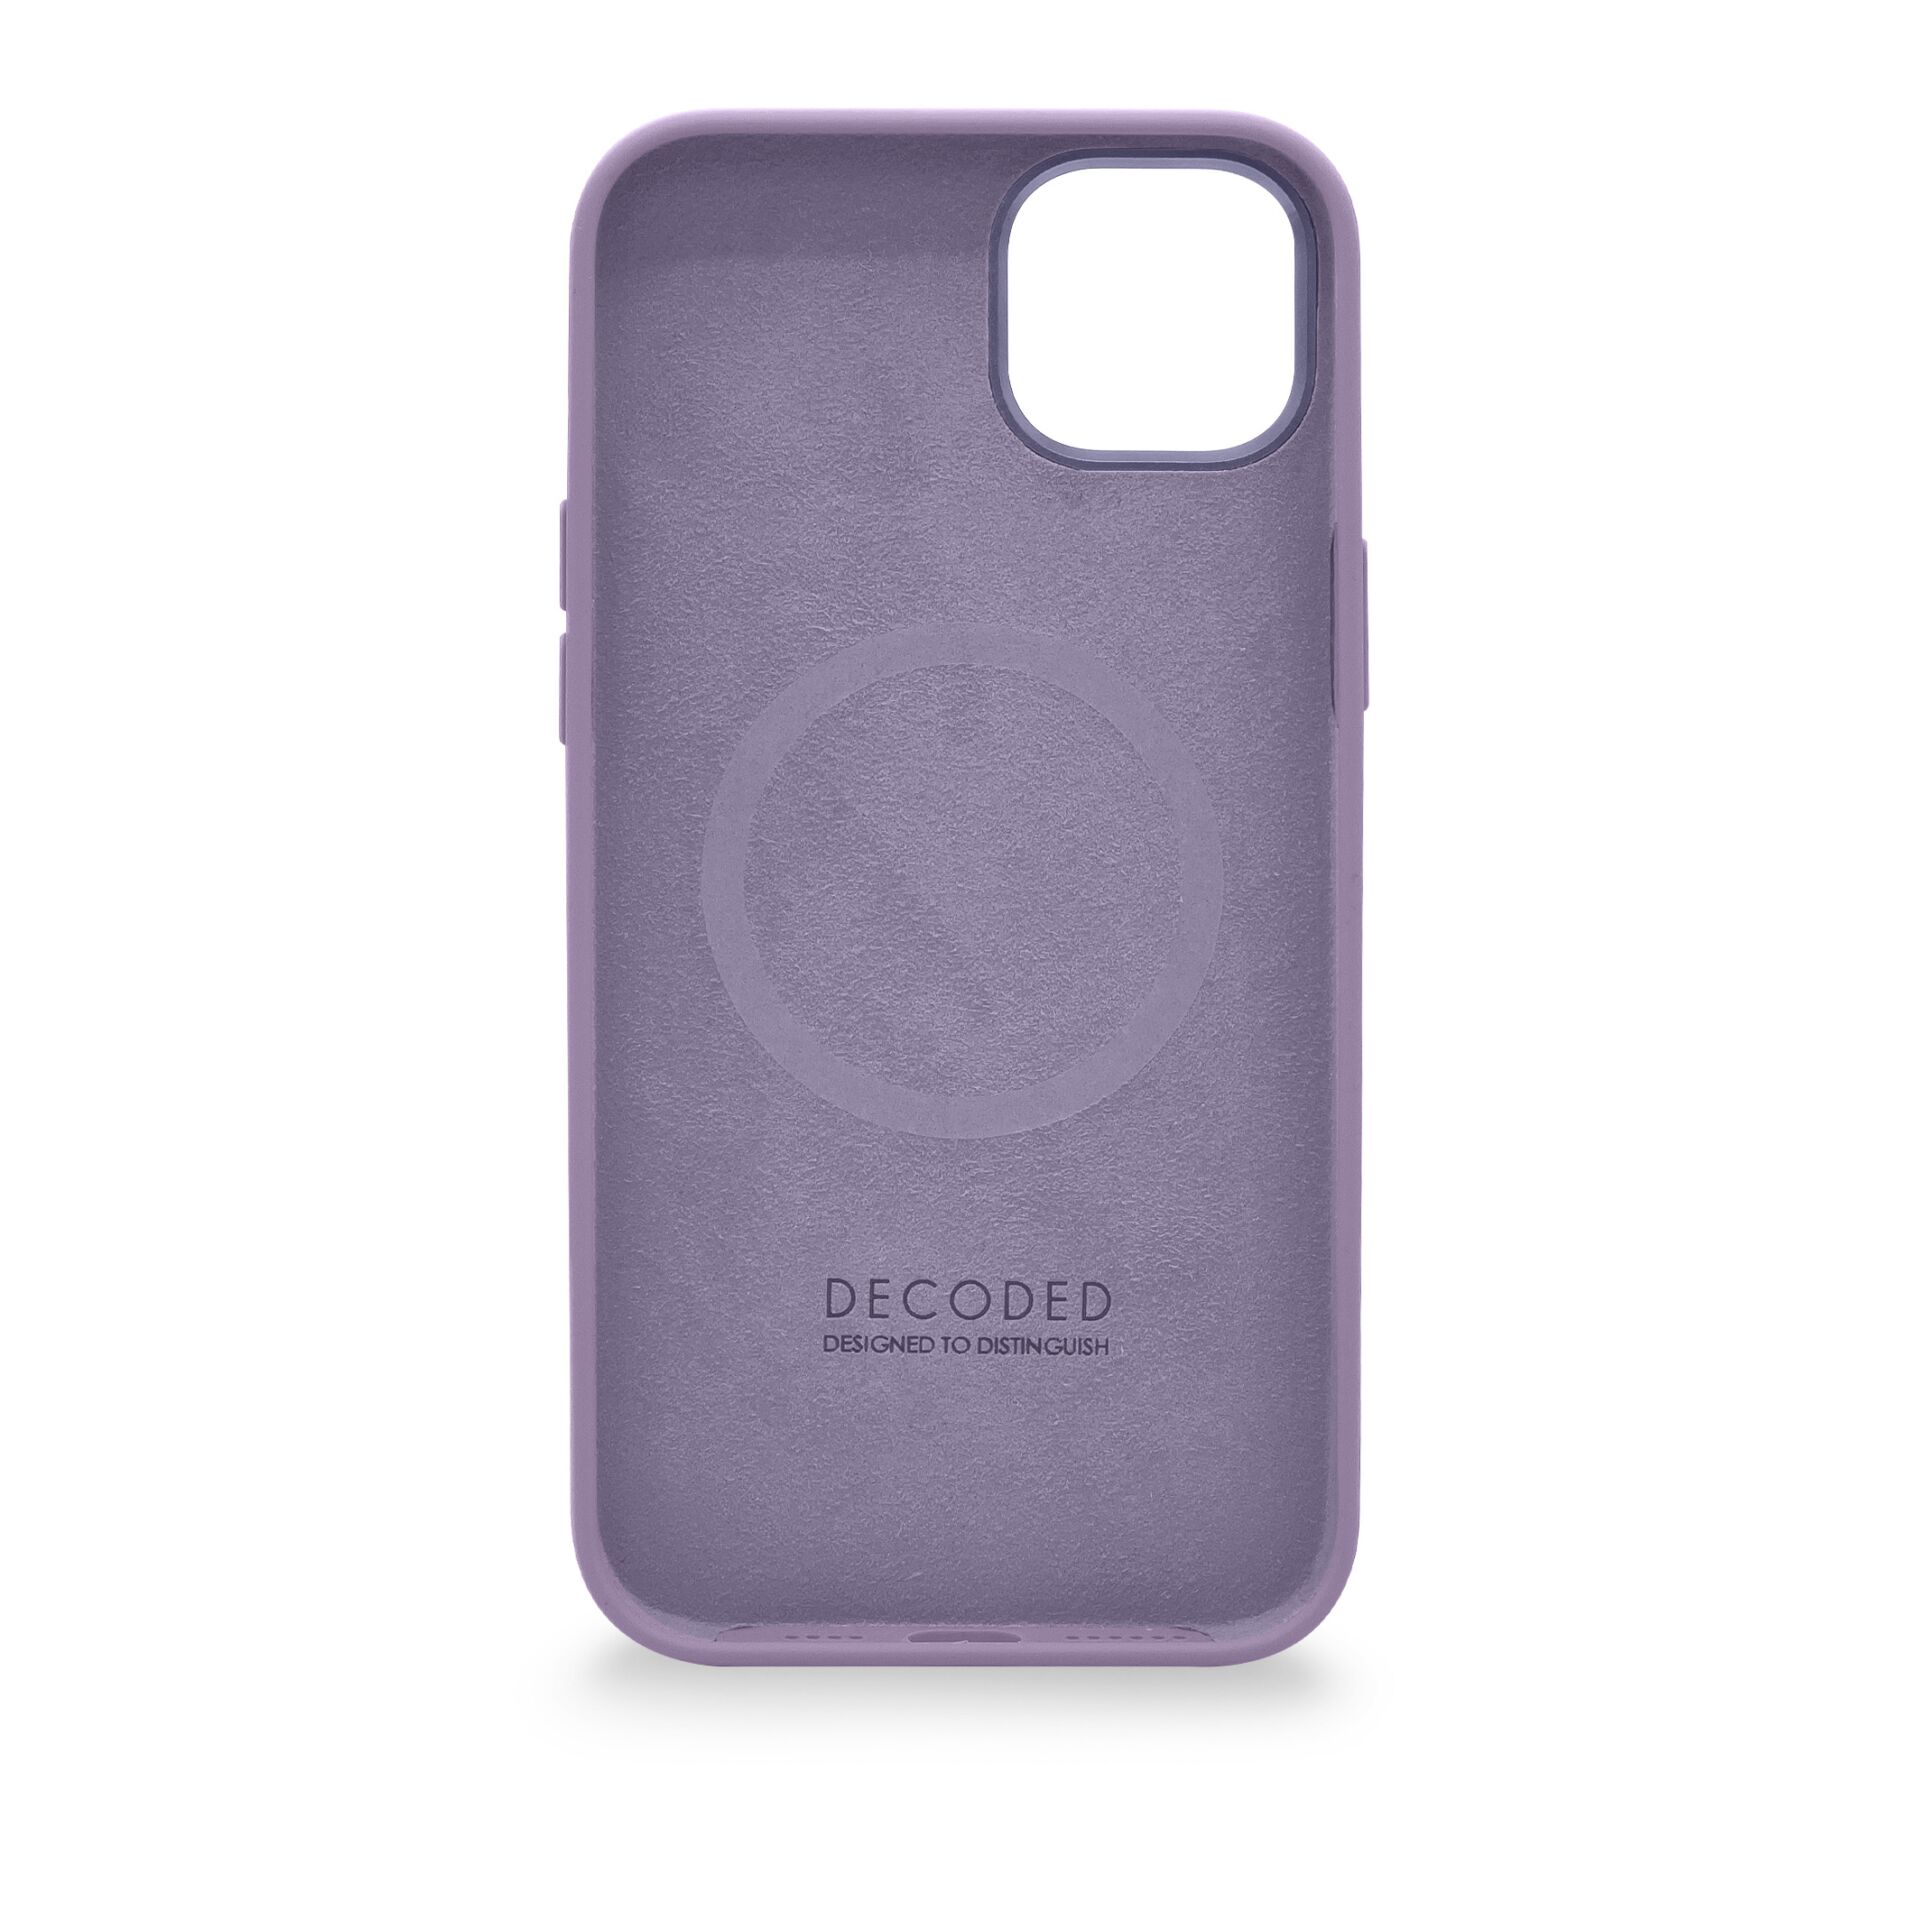 Backcover, Apple, 14 Silicone Plus, Lavender, iPhone AntiMicrobial Lavender DECODED Backcover